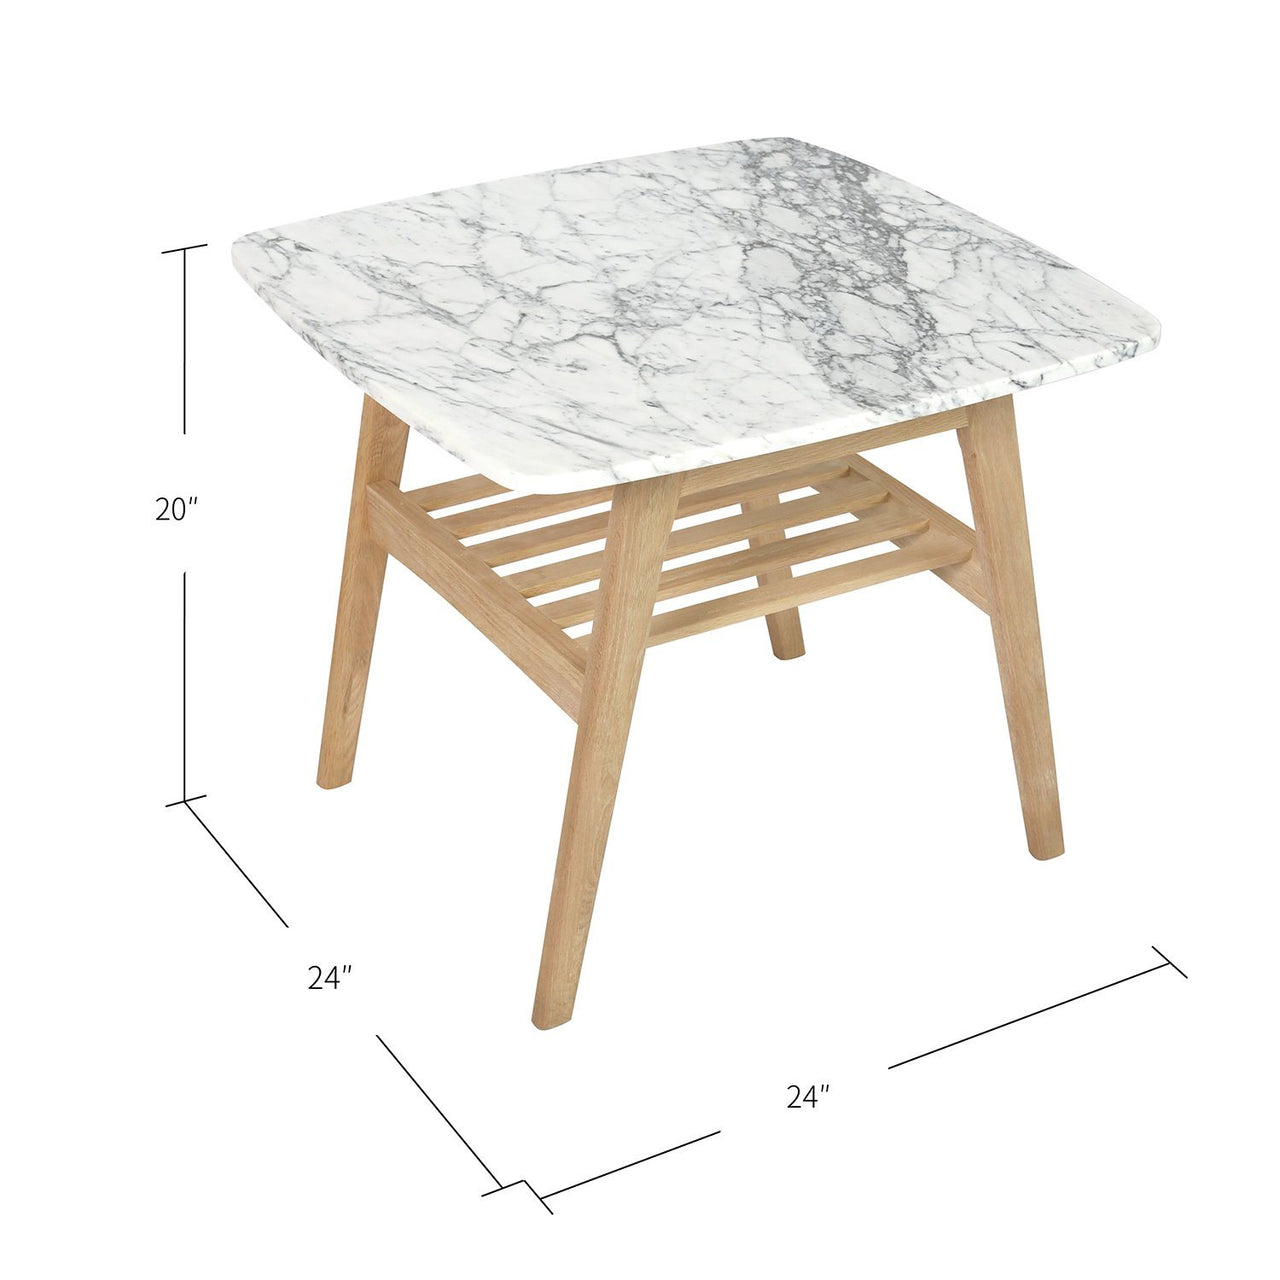 Cassoro 24" Square Italian Carrara White Marble Side Table with Shelf Side Table The Bianco Collection 